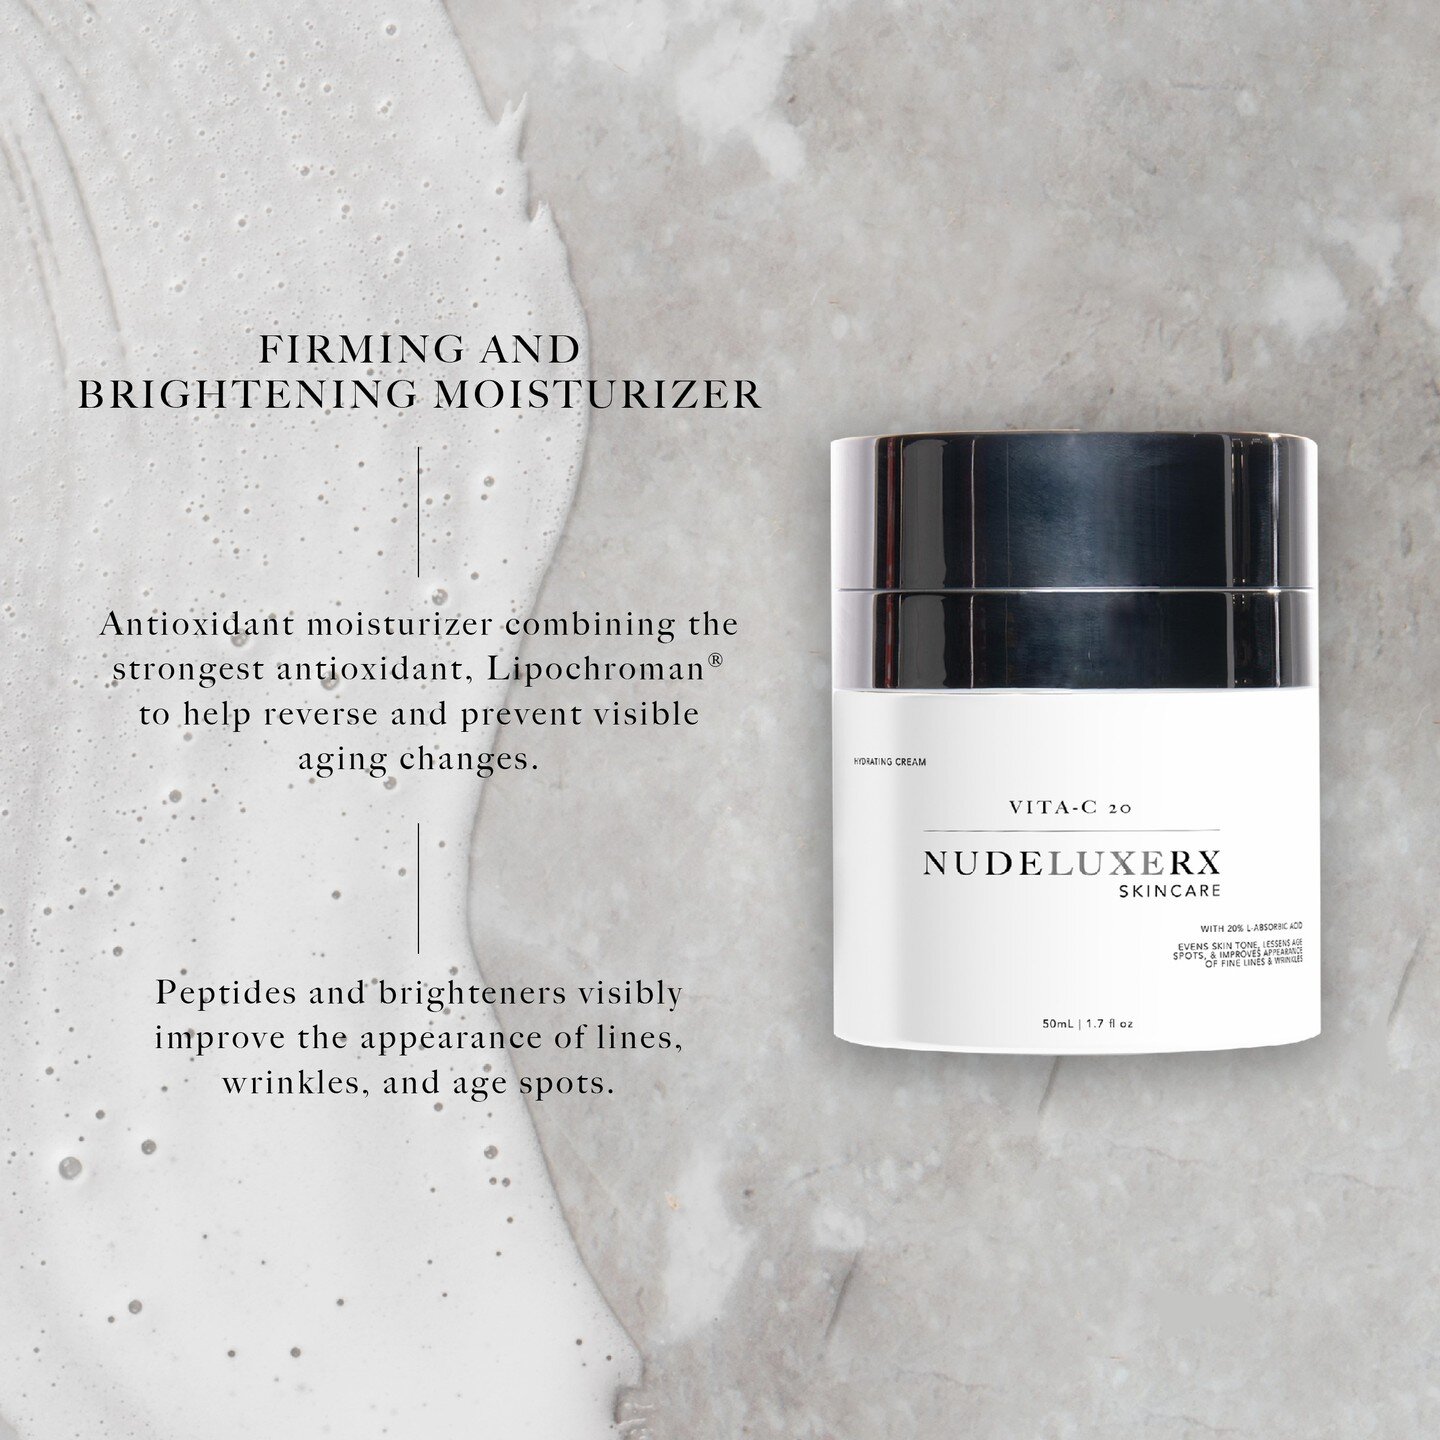 Our hydrating Vita-C 20 Treatment Cream with 20% L-Ascorbic Acid:
◽ Improves appearance of fine lines
◽ Evens skin tone
◽ Lessens age spots